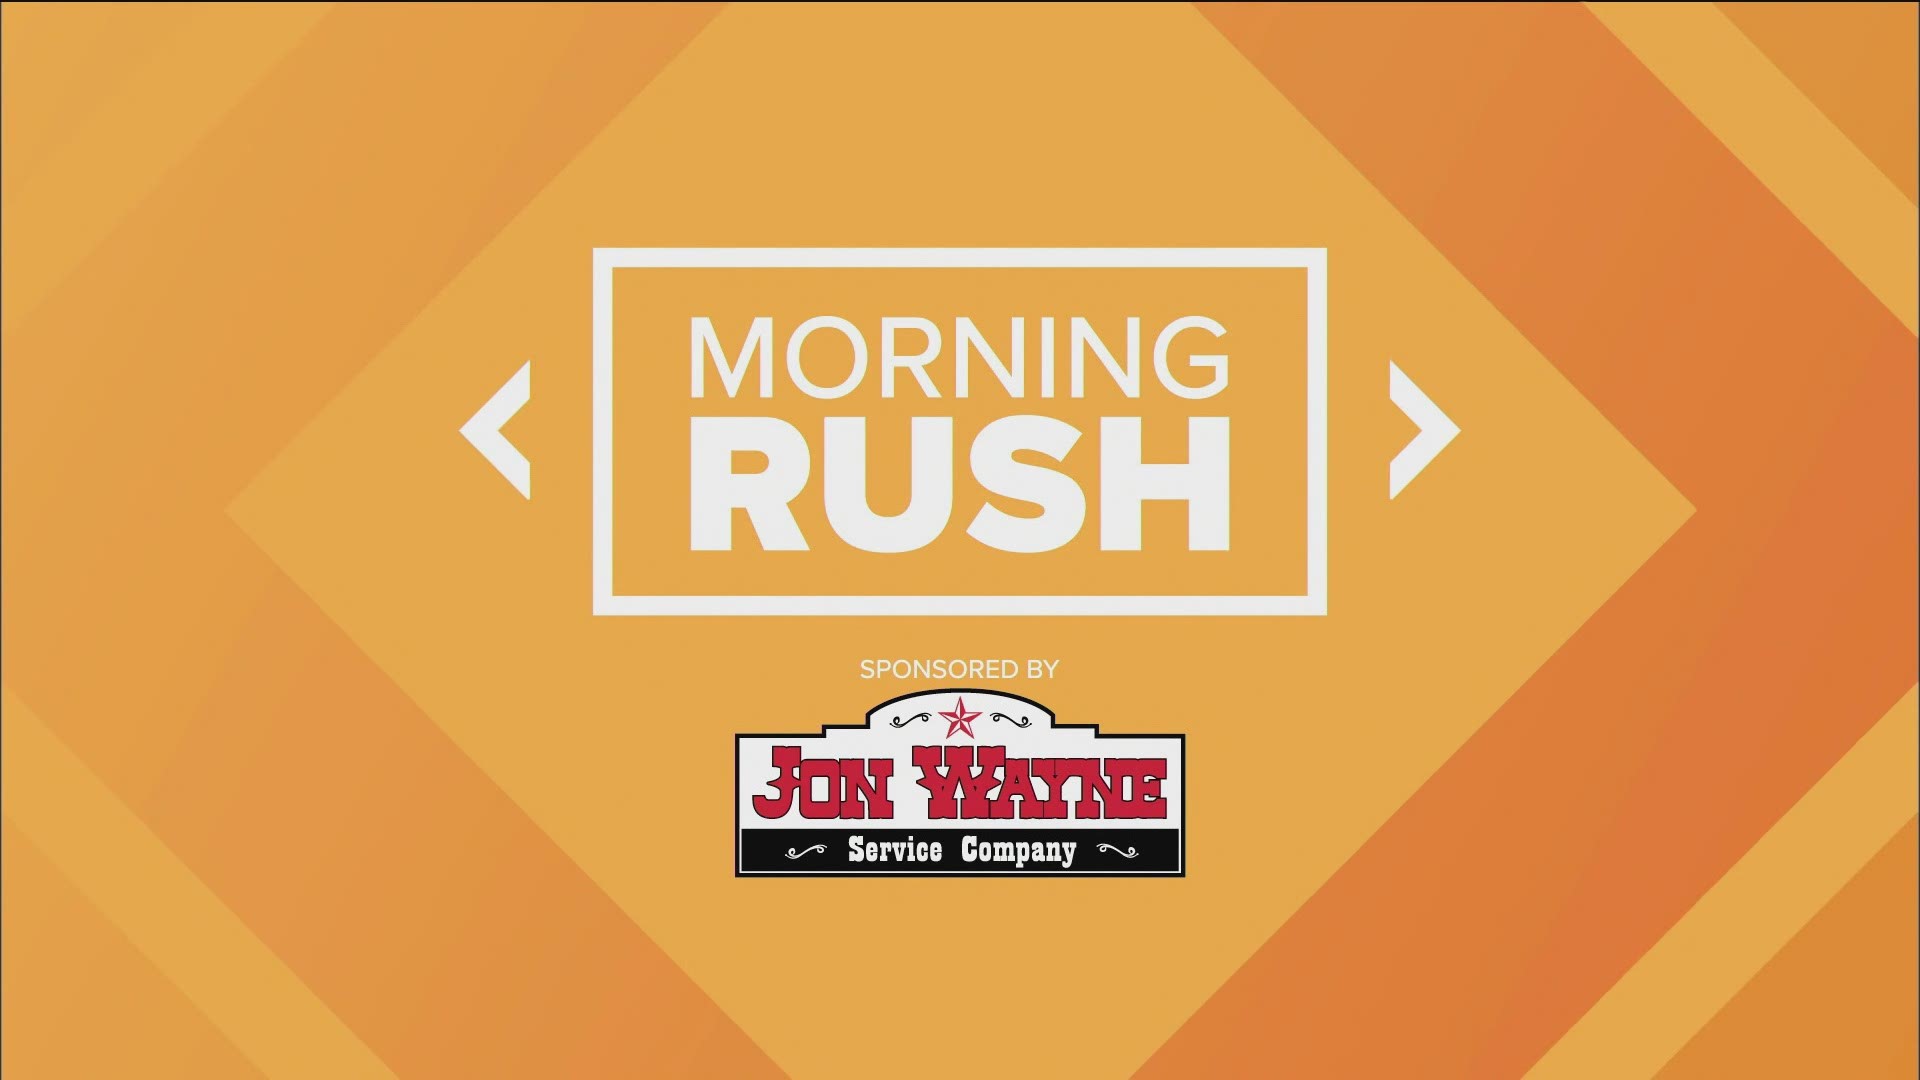 We're getting you caught up on everything you need to know before heading out the door this morning in today's Morning Rush.